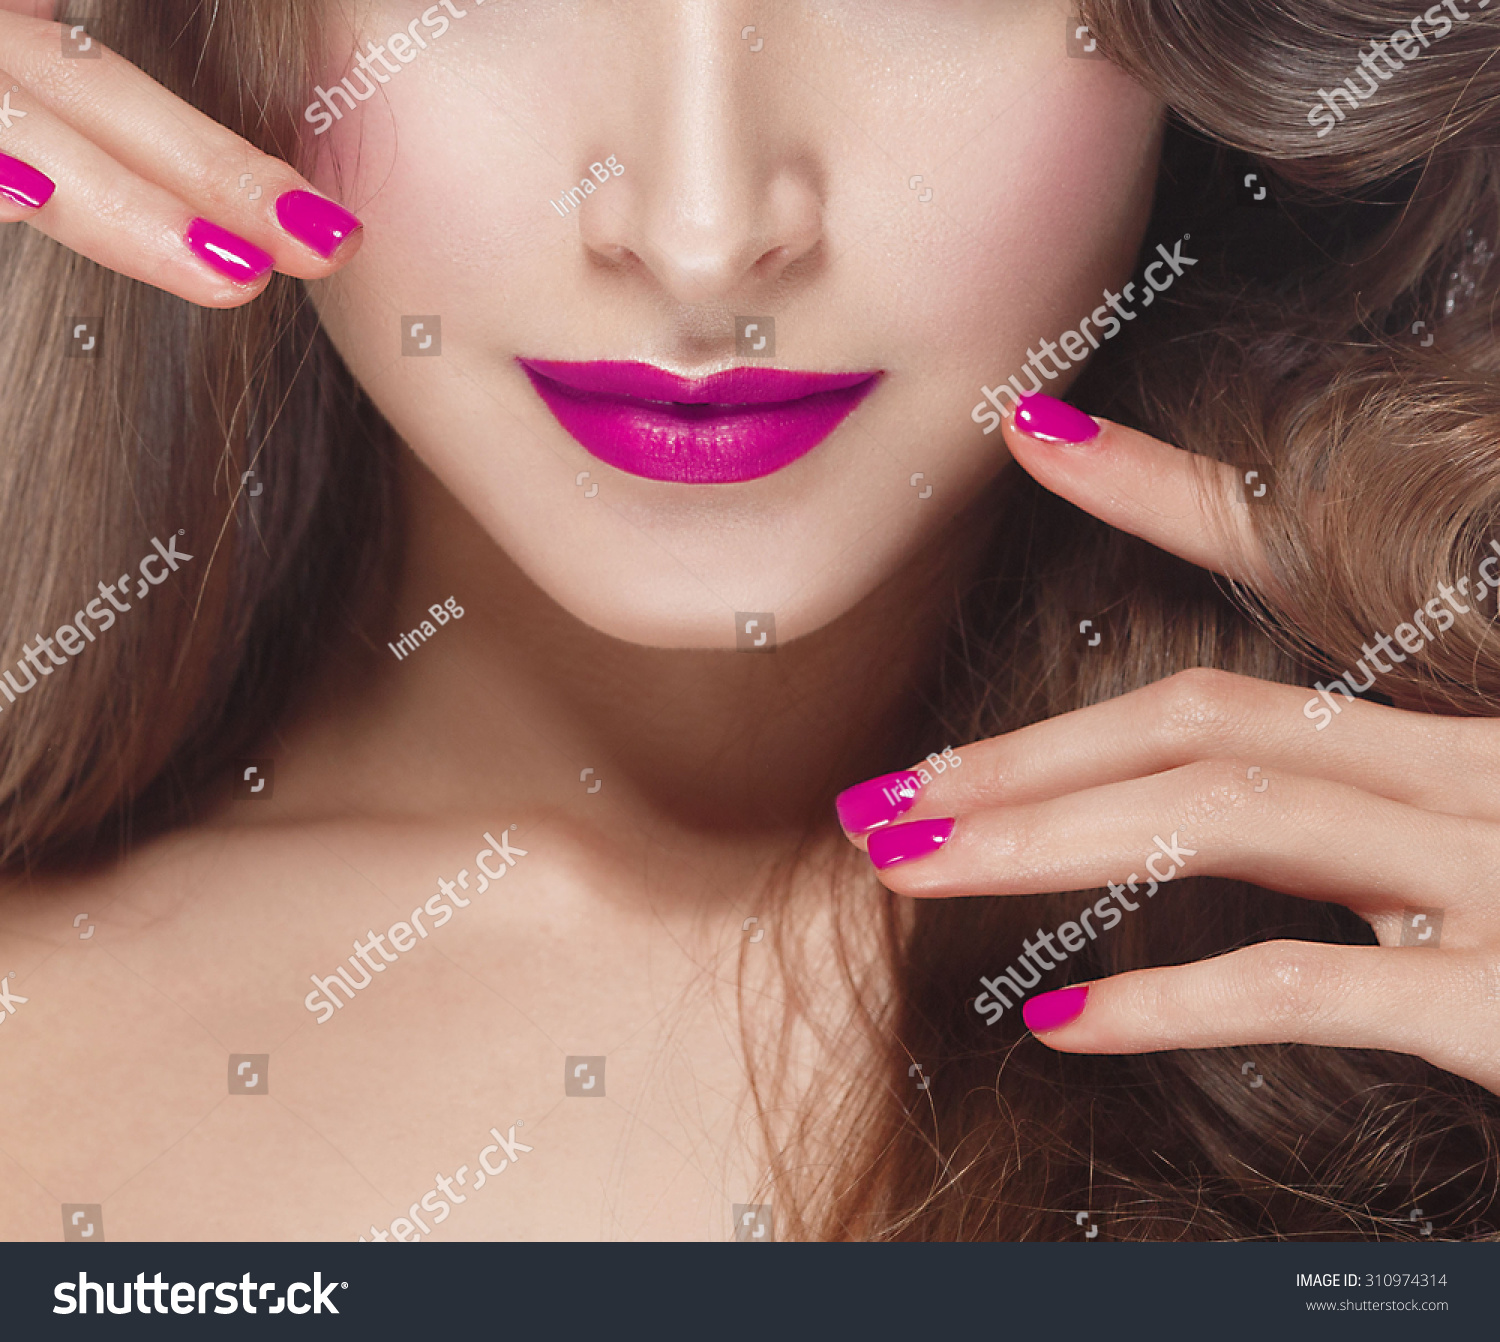 Beautiful Woman Young Face Pink Lips Stock Photo (Royalty Free ...